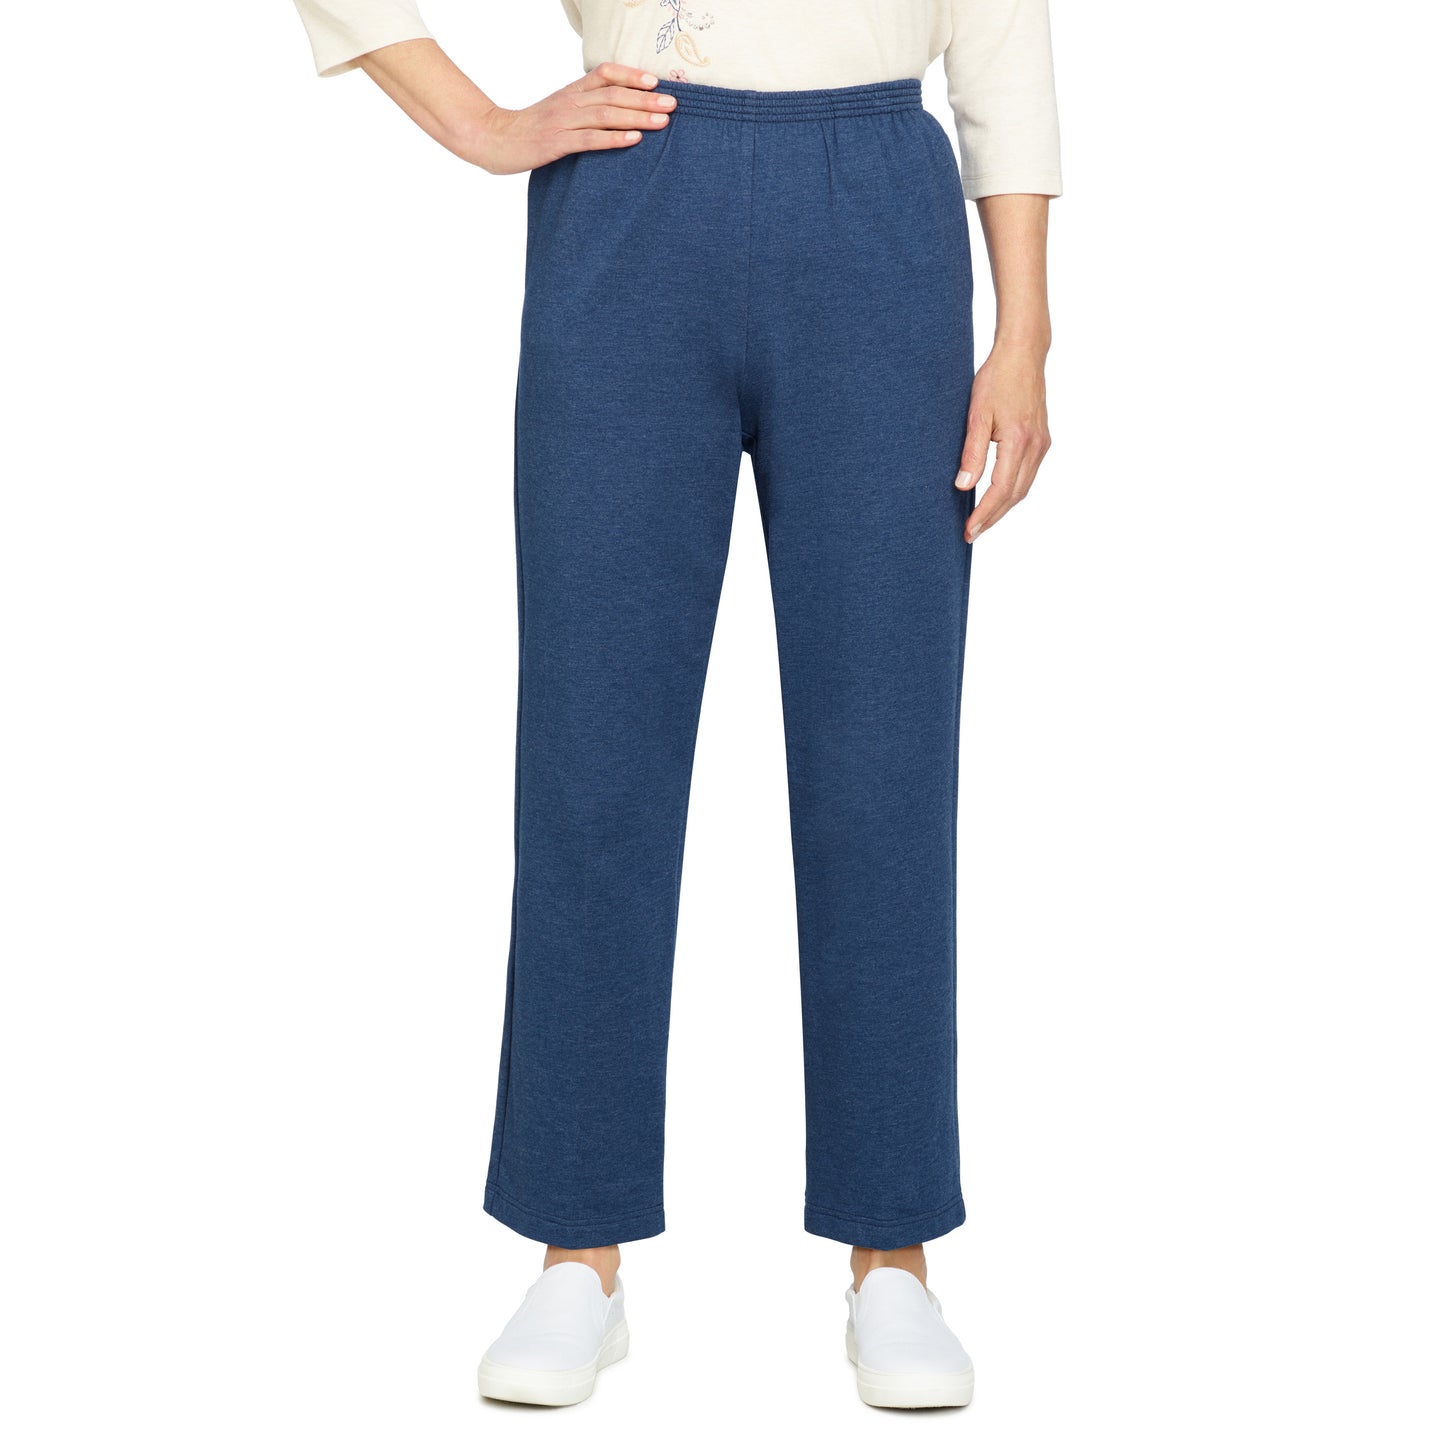 Relax And Enjoy French Terry Pant Medium Length